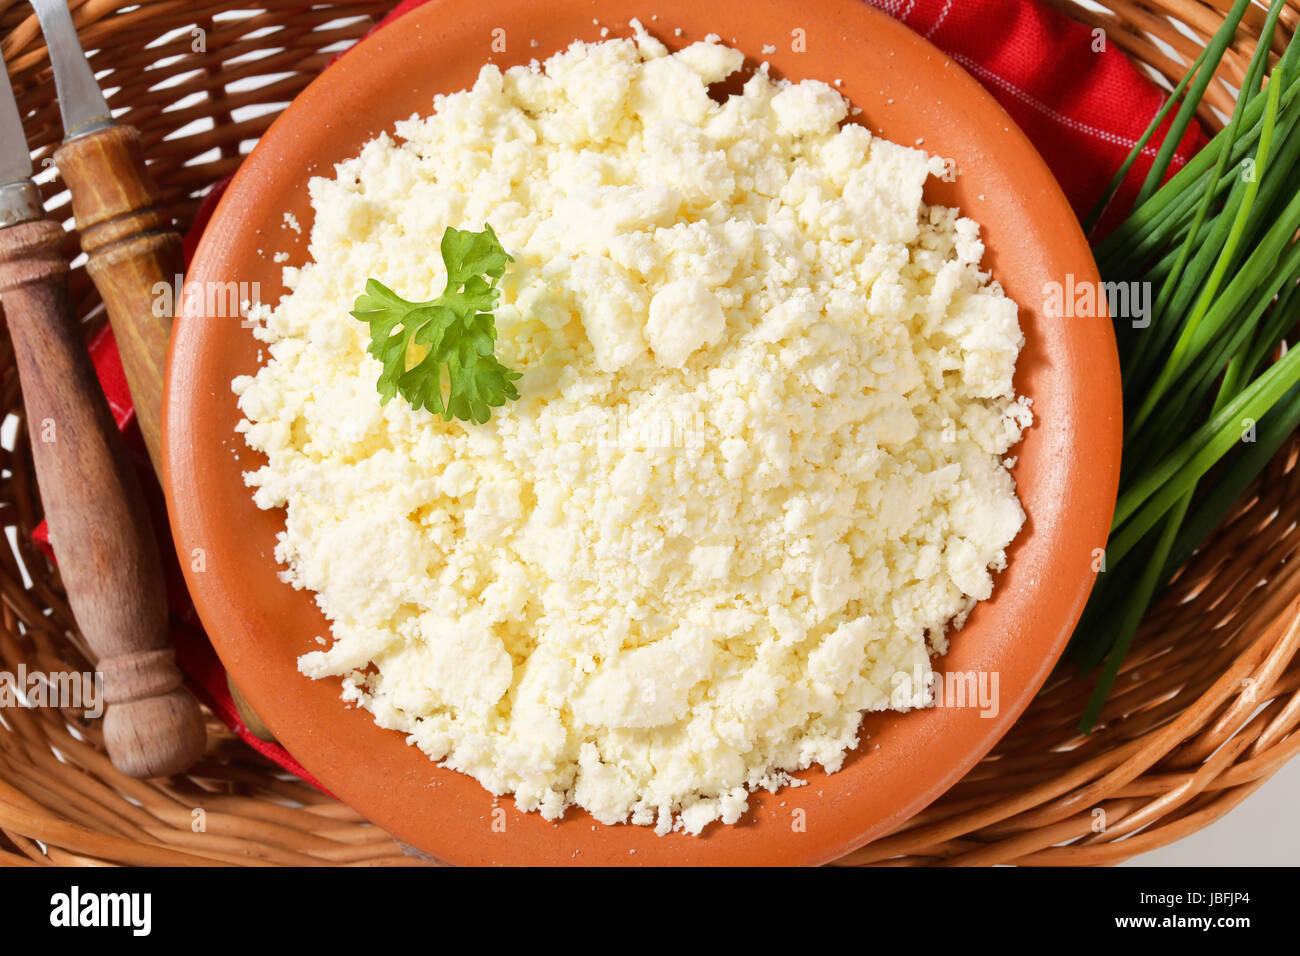 Bowl of Bryndza cheese and fresh chives in wicker basket Stock Photo